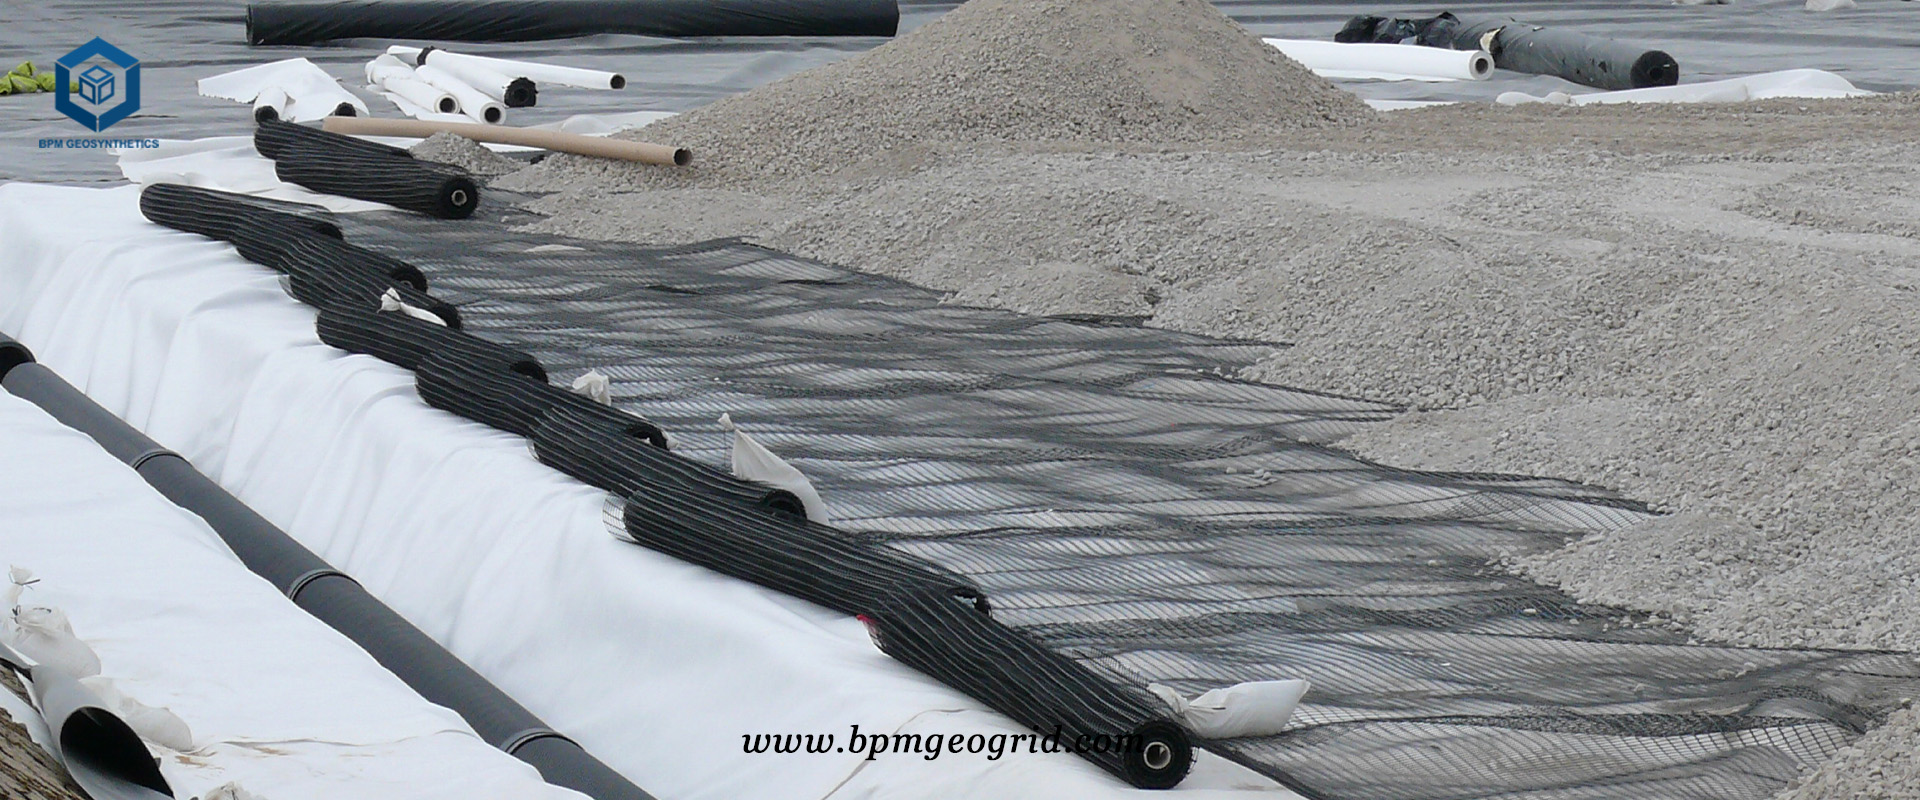 Biaxial Geogrid For Road Project In Oman